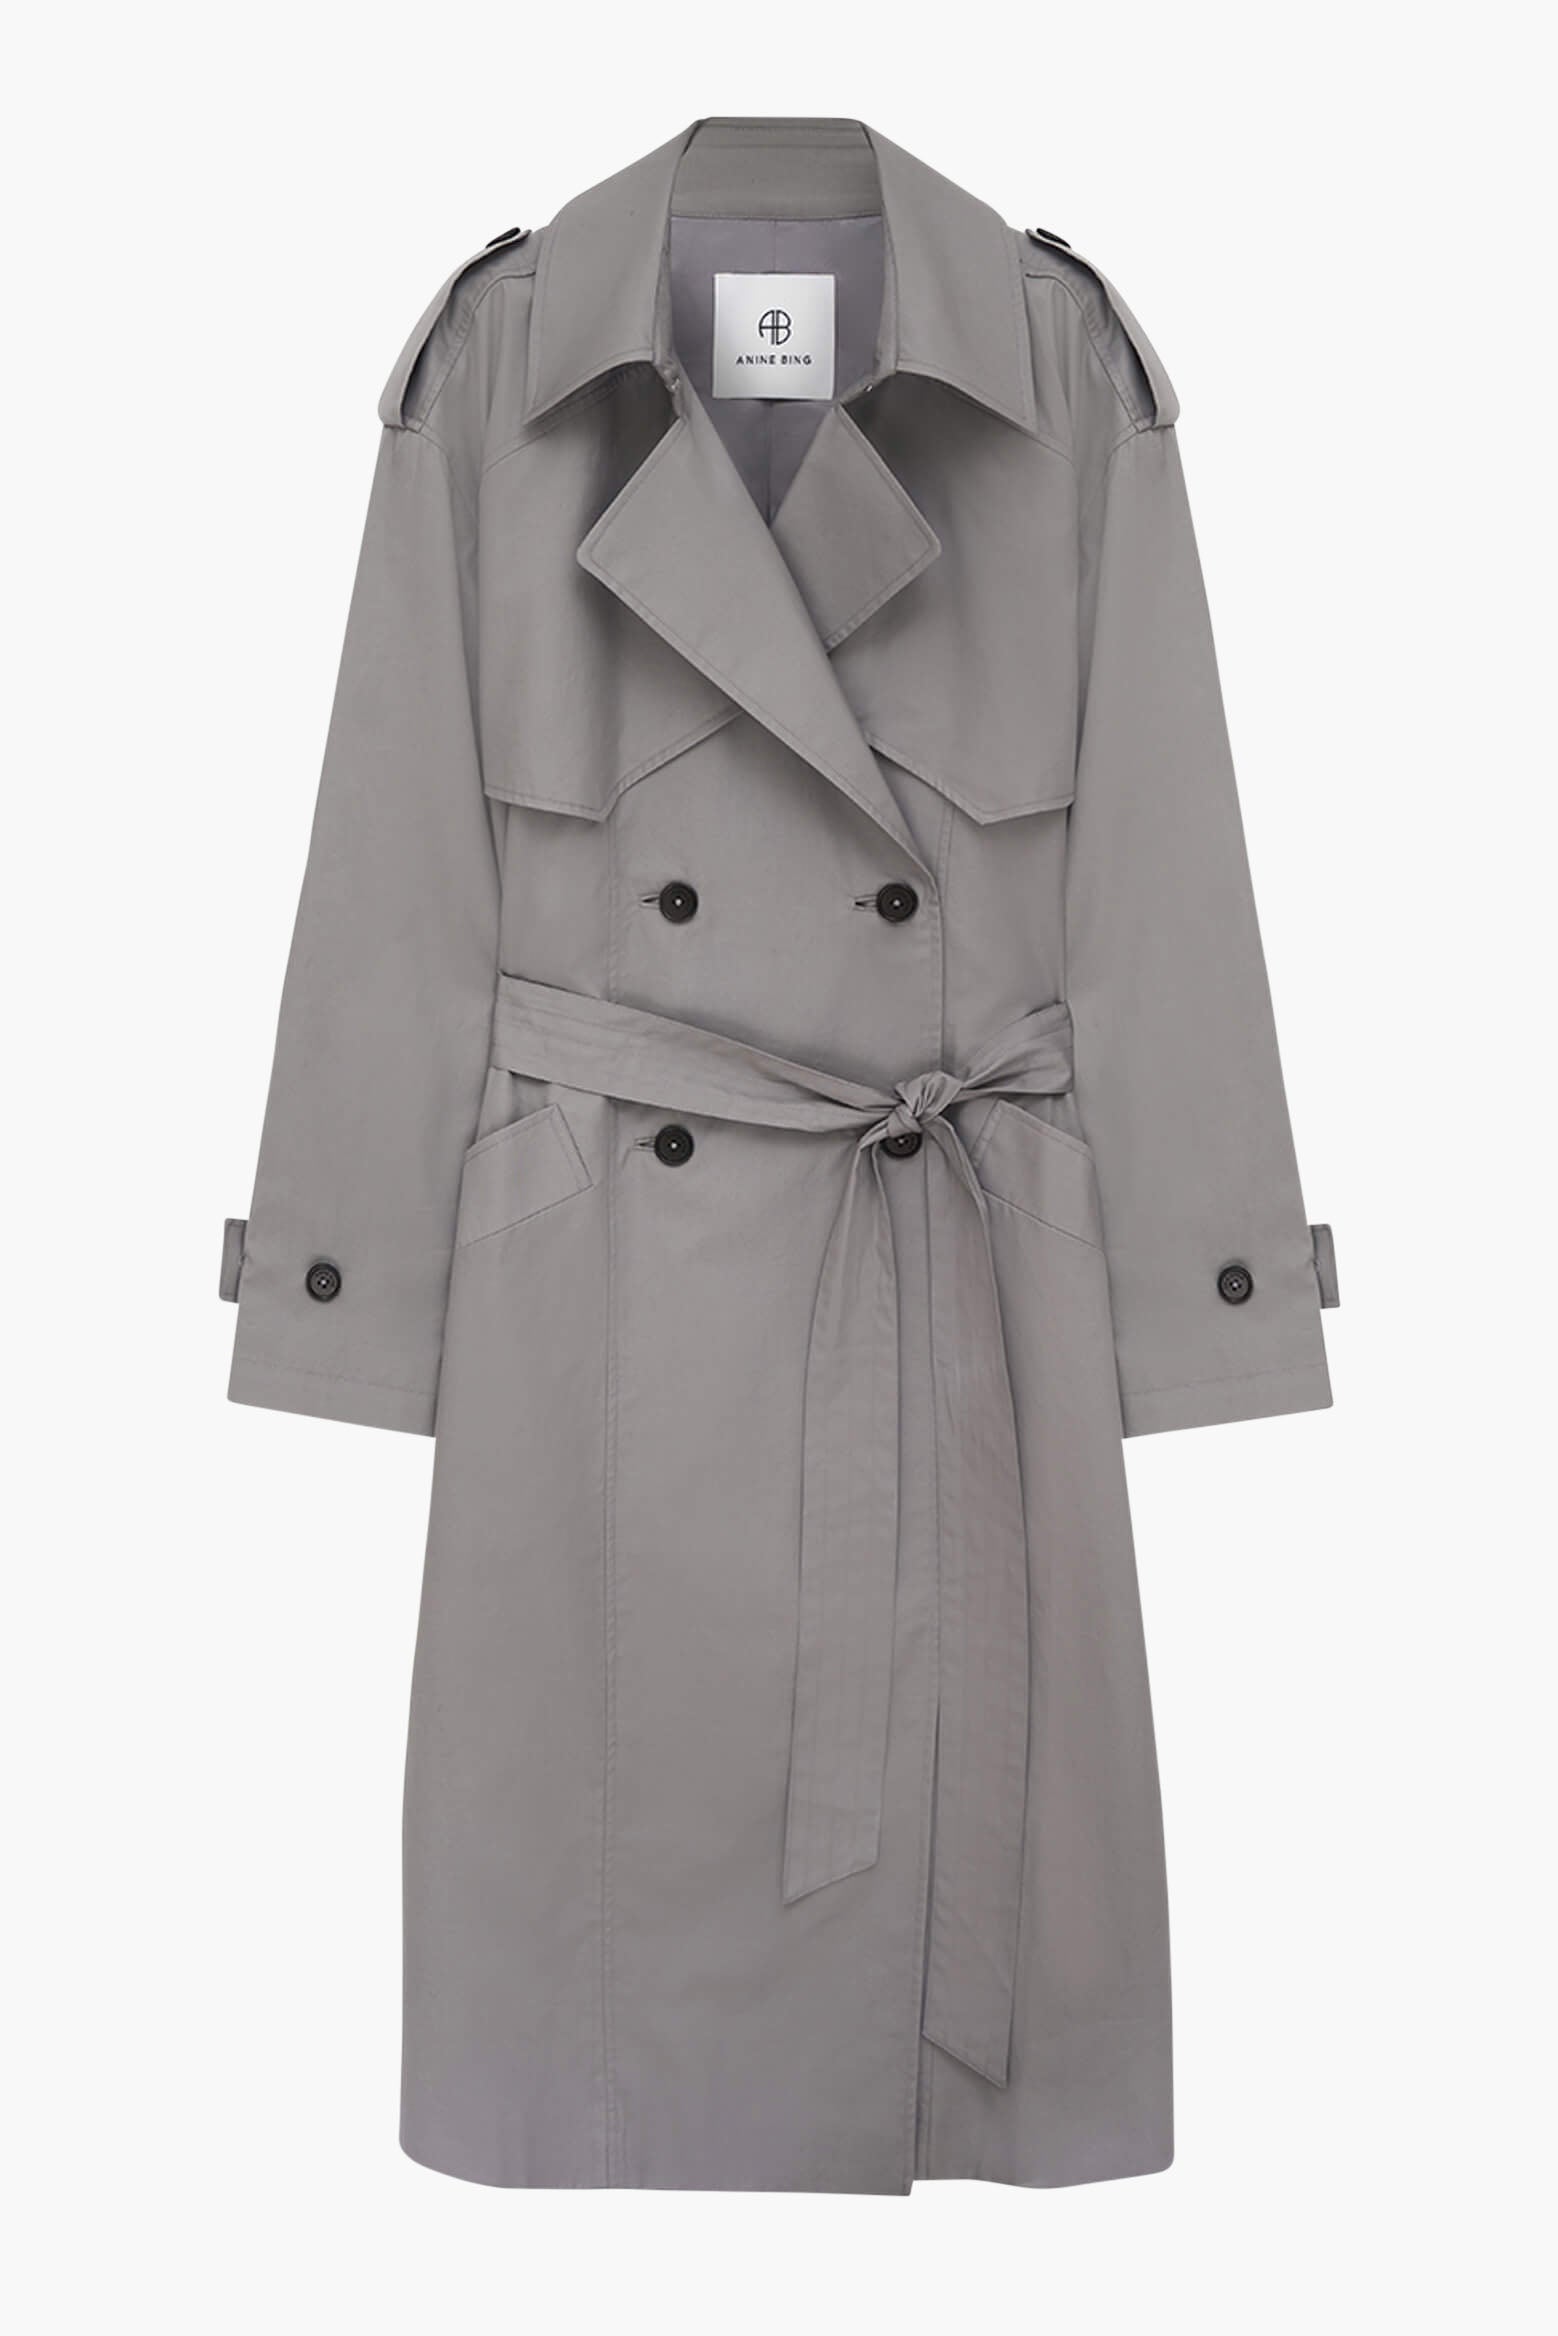 Anine Bing Finley Trench in Grey available at TNT The New Trend Australia.